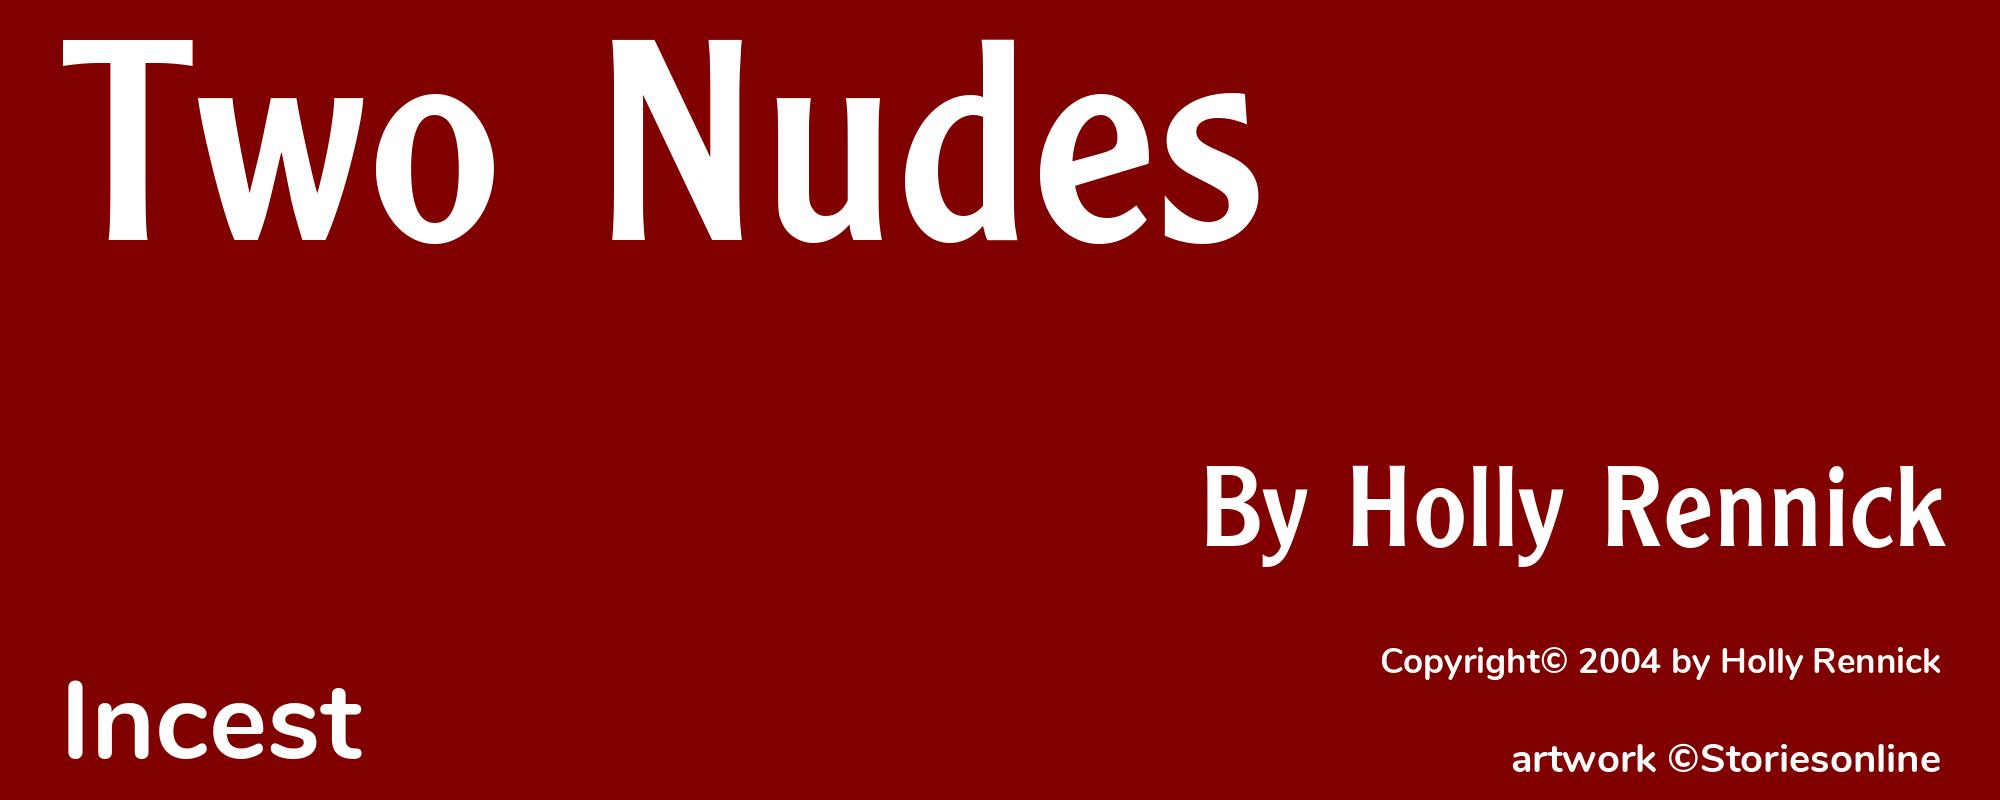 Two Nudes - Cover